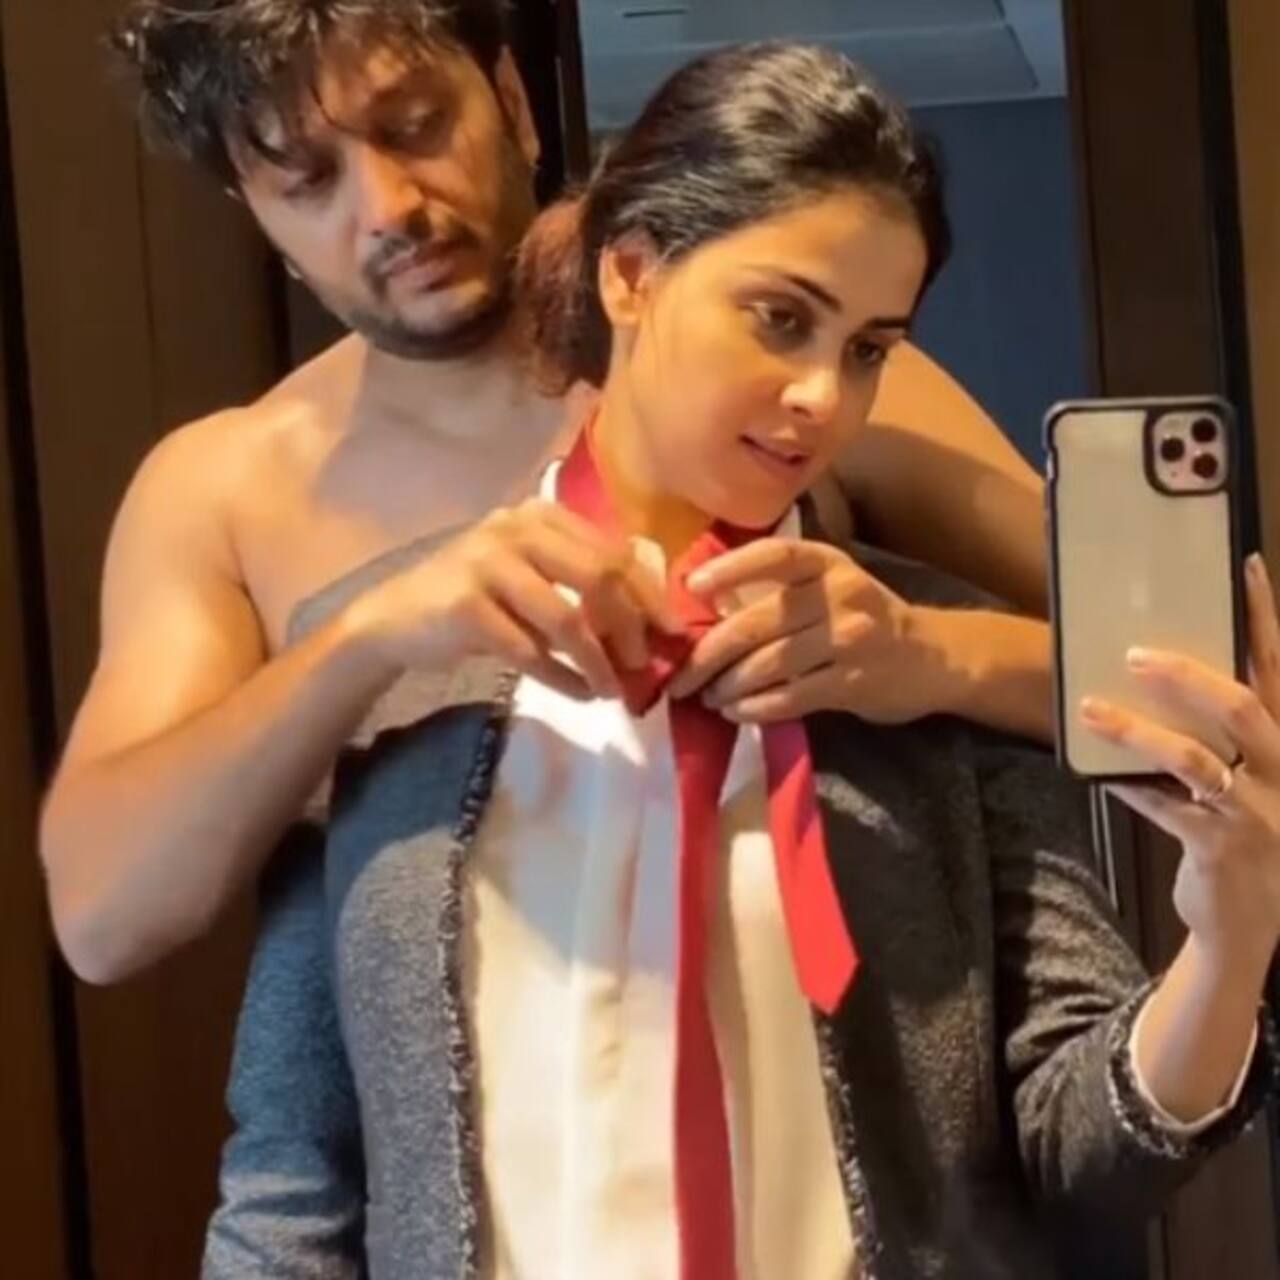 Riteish Deshmukh goes SHIRTLESS while Genelia turns goofy in this HOT and  CUTE video